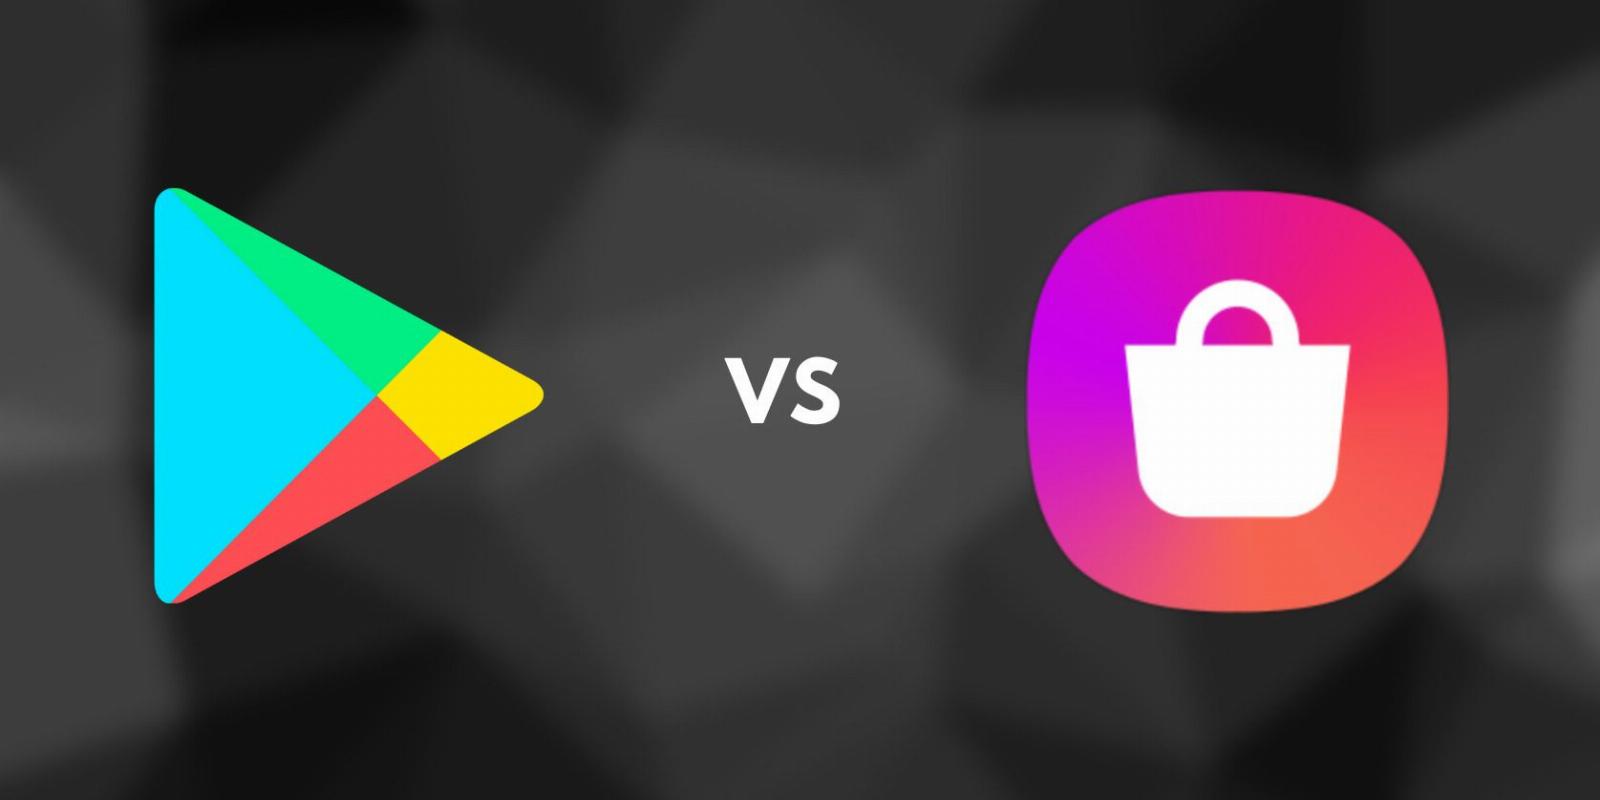 Google Play Store vs. Samsung Galaxy Store: What’s the Difference and Which Should You Use?